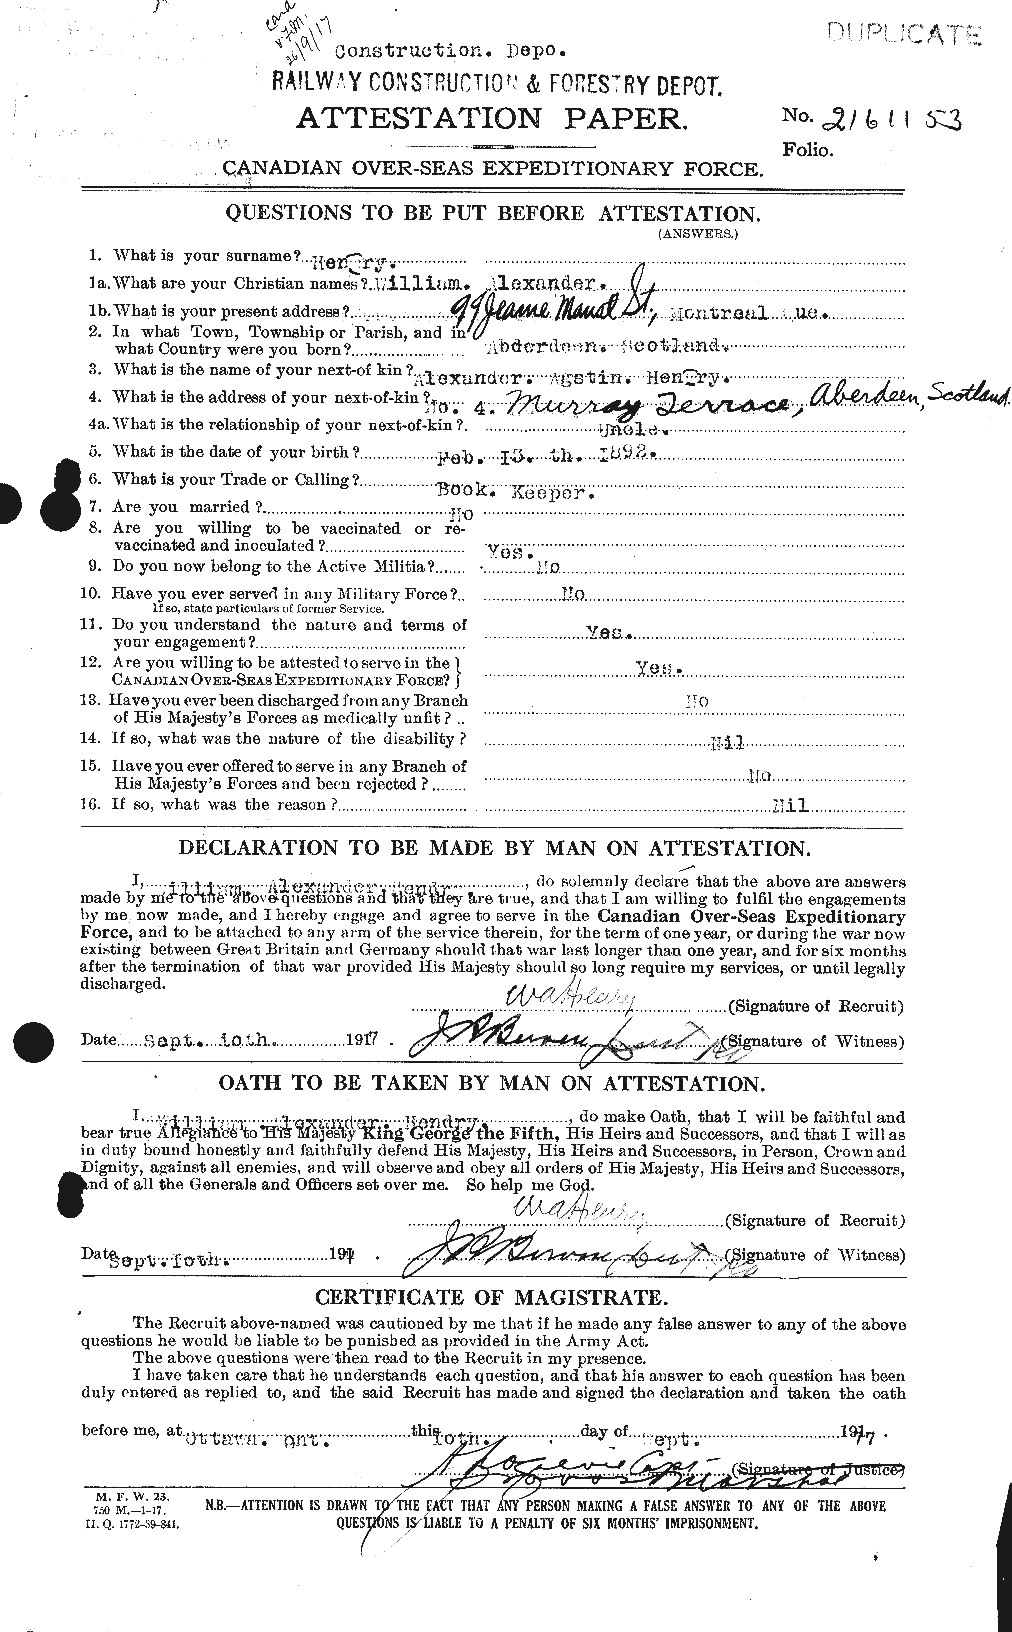 Personnel Records of the First World War - CEF 387770a